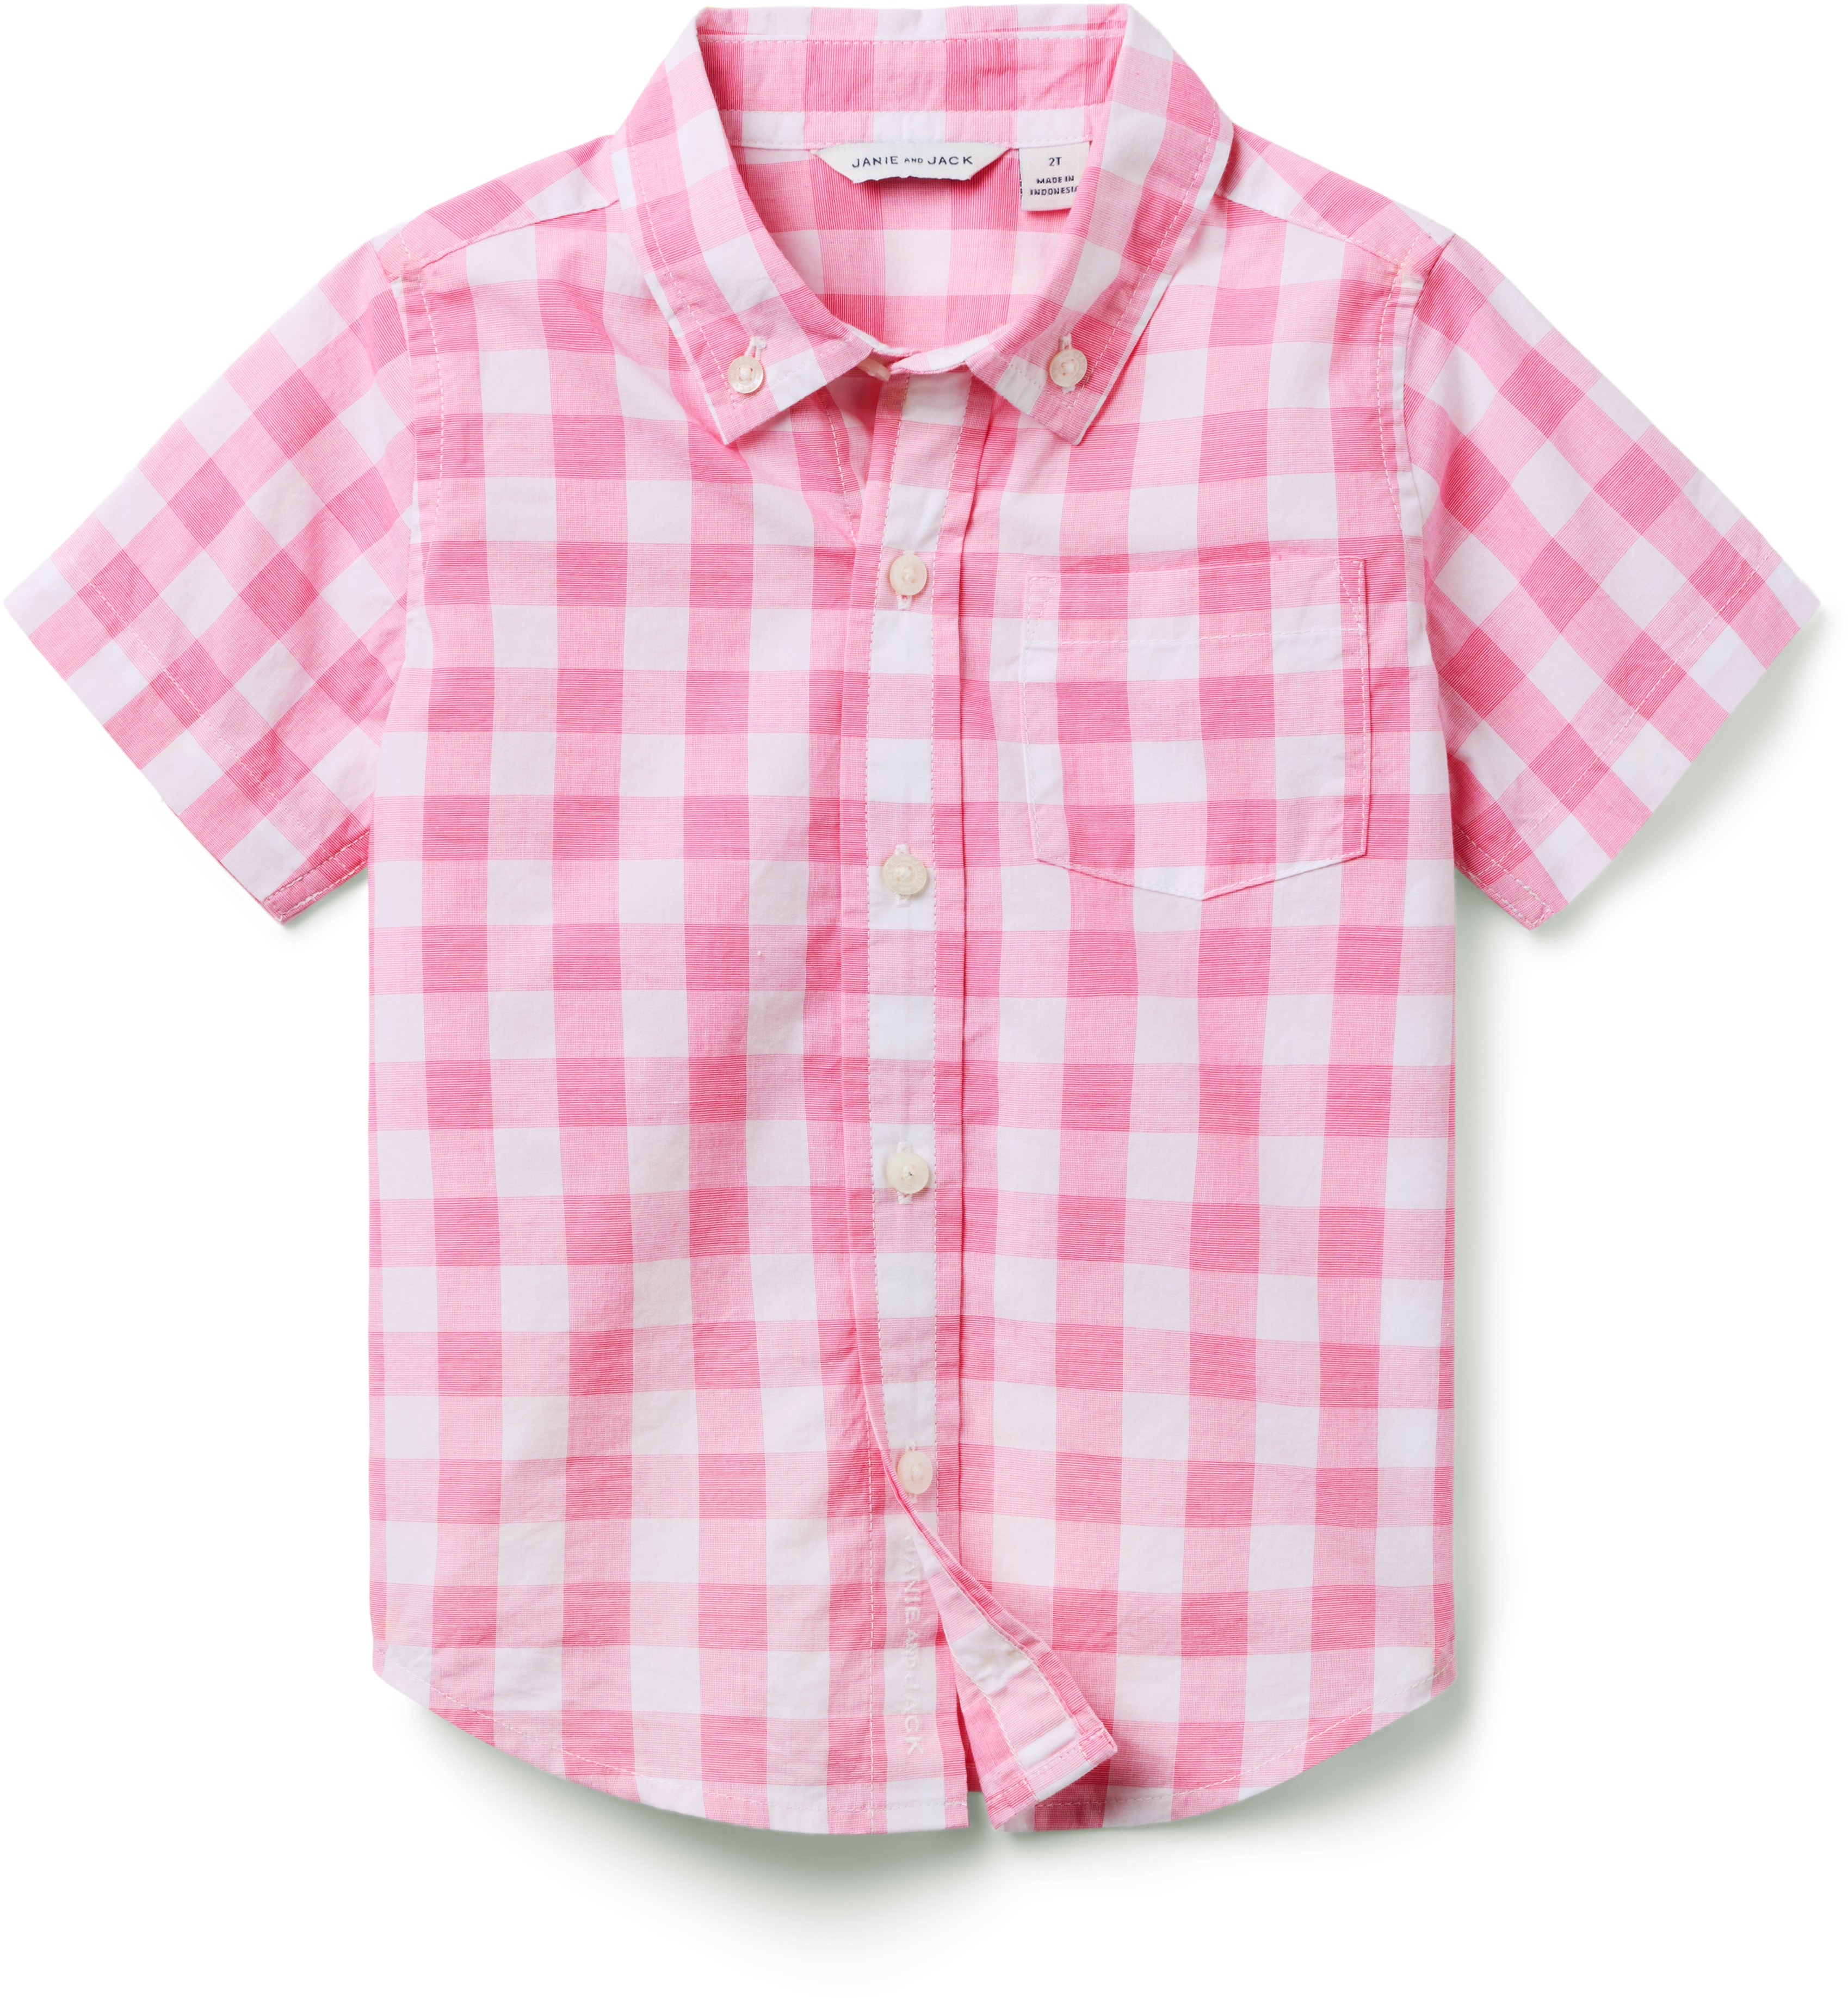 Boys Gingham Top (Toddler/Little Kid/Big Kid) Janie and Jack